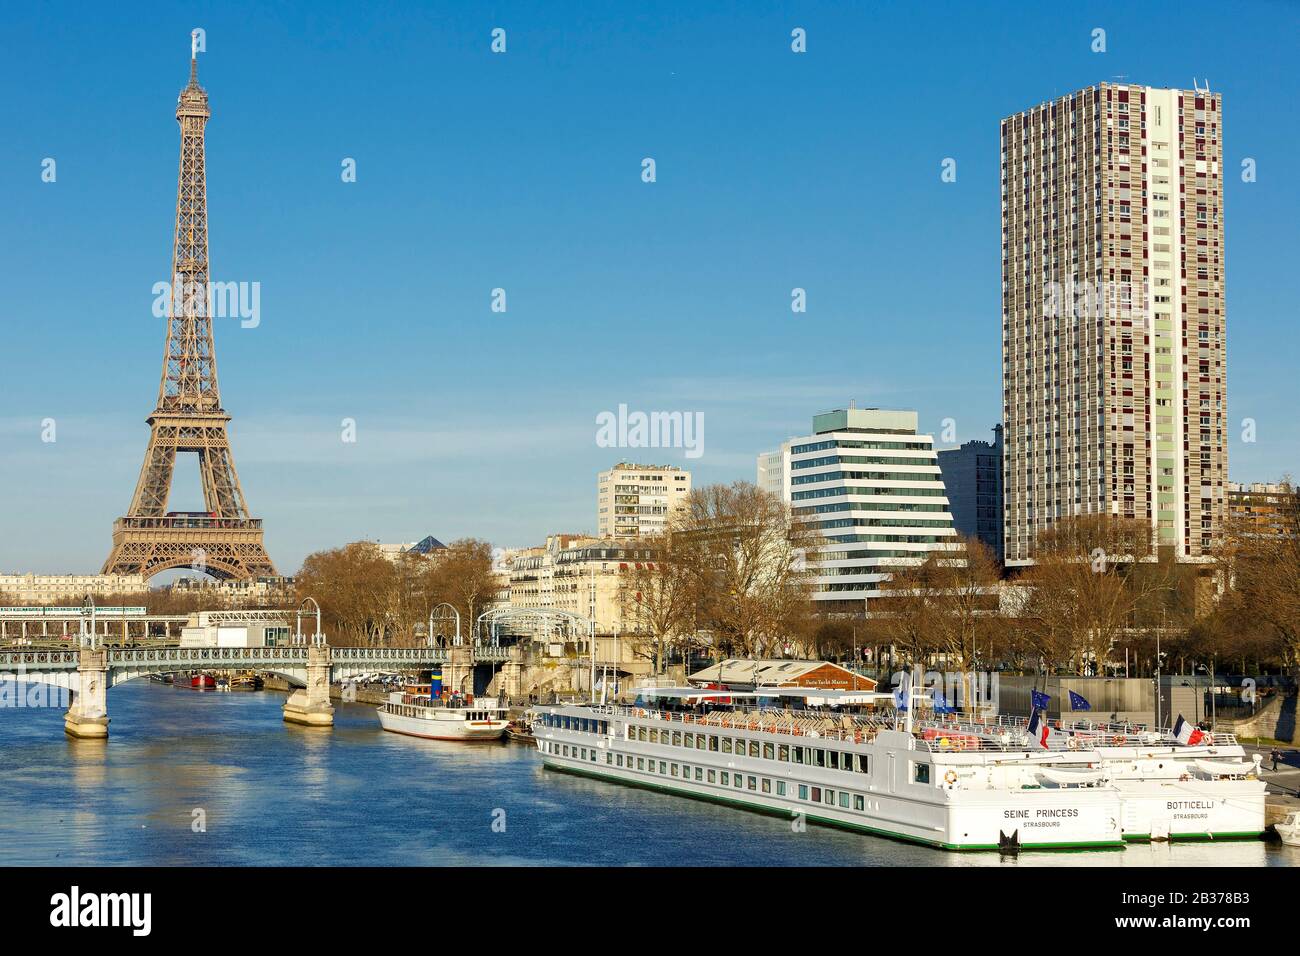 France, Paris, the riverbanks of the Seine river listed as World Heritage by UNESCO, facades of apartment buildings in Beaugrenelle district, Rouelle and Bir Hakeim bridges and Eiffel tower Stock Photo